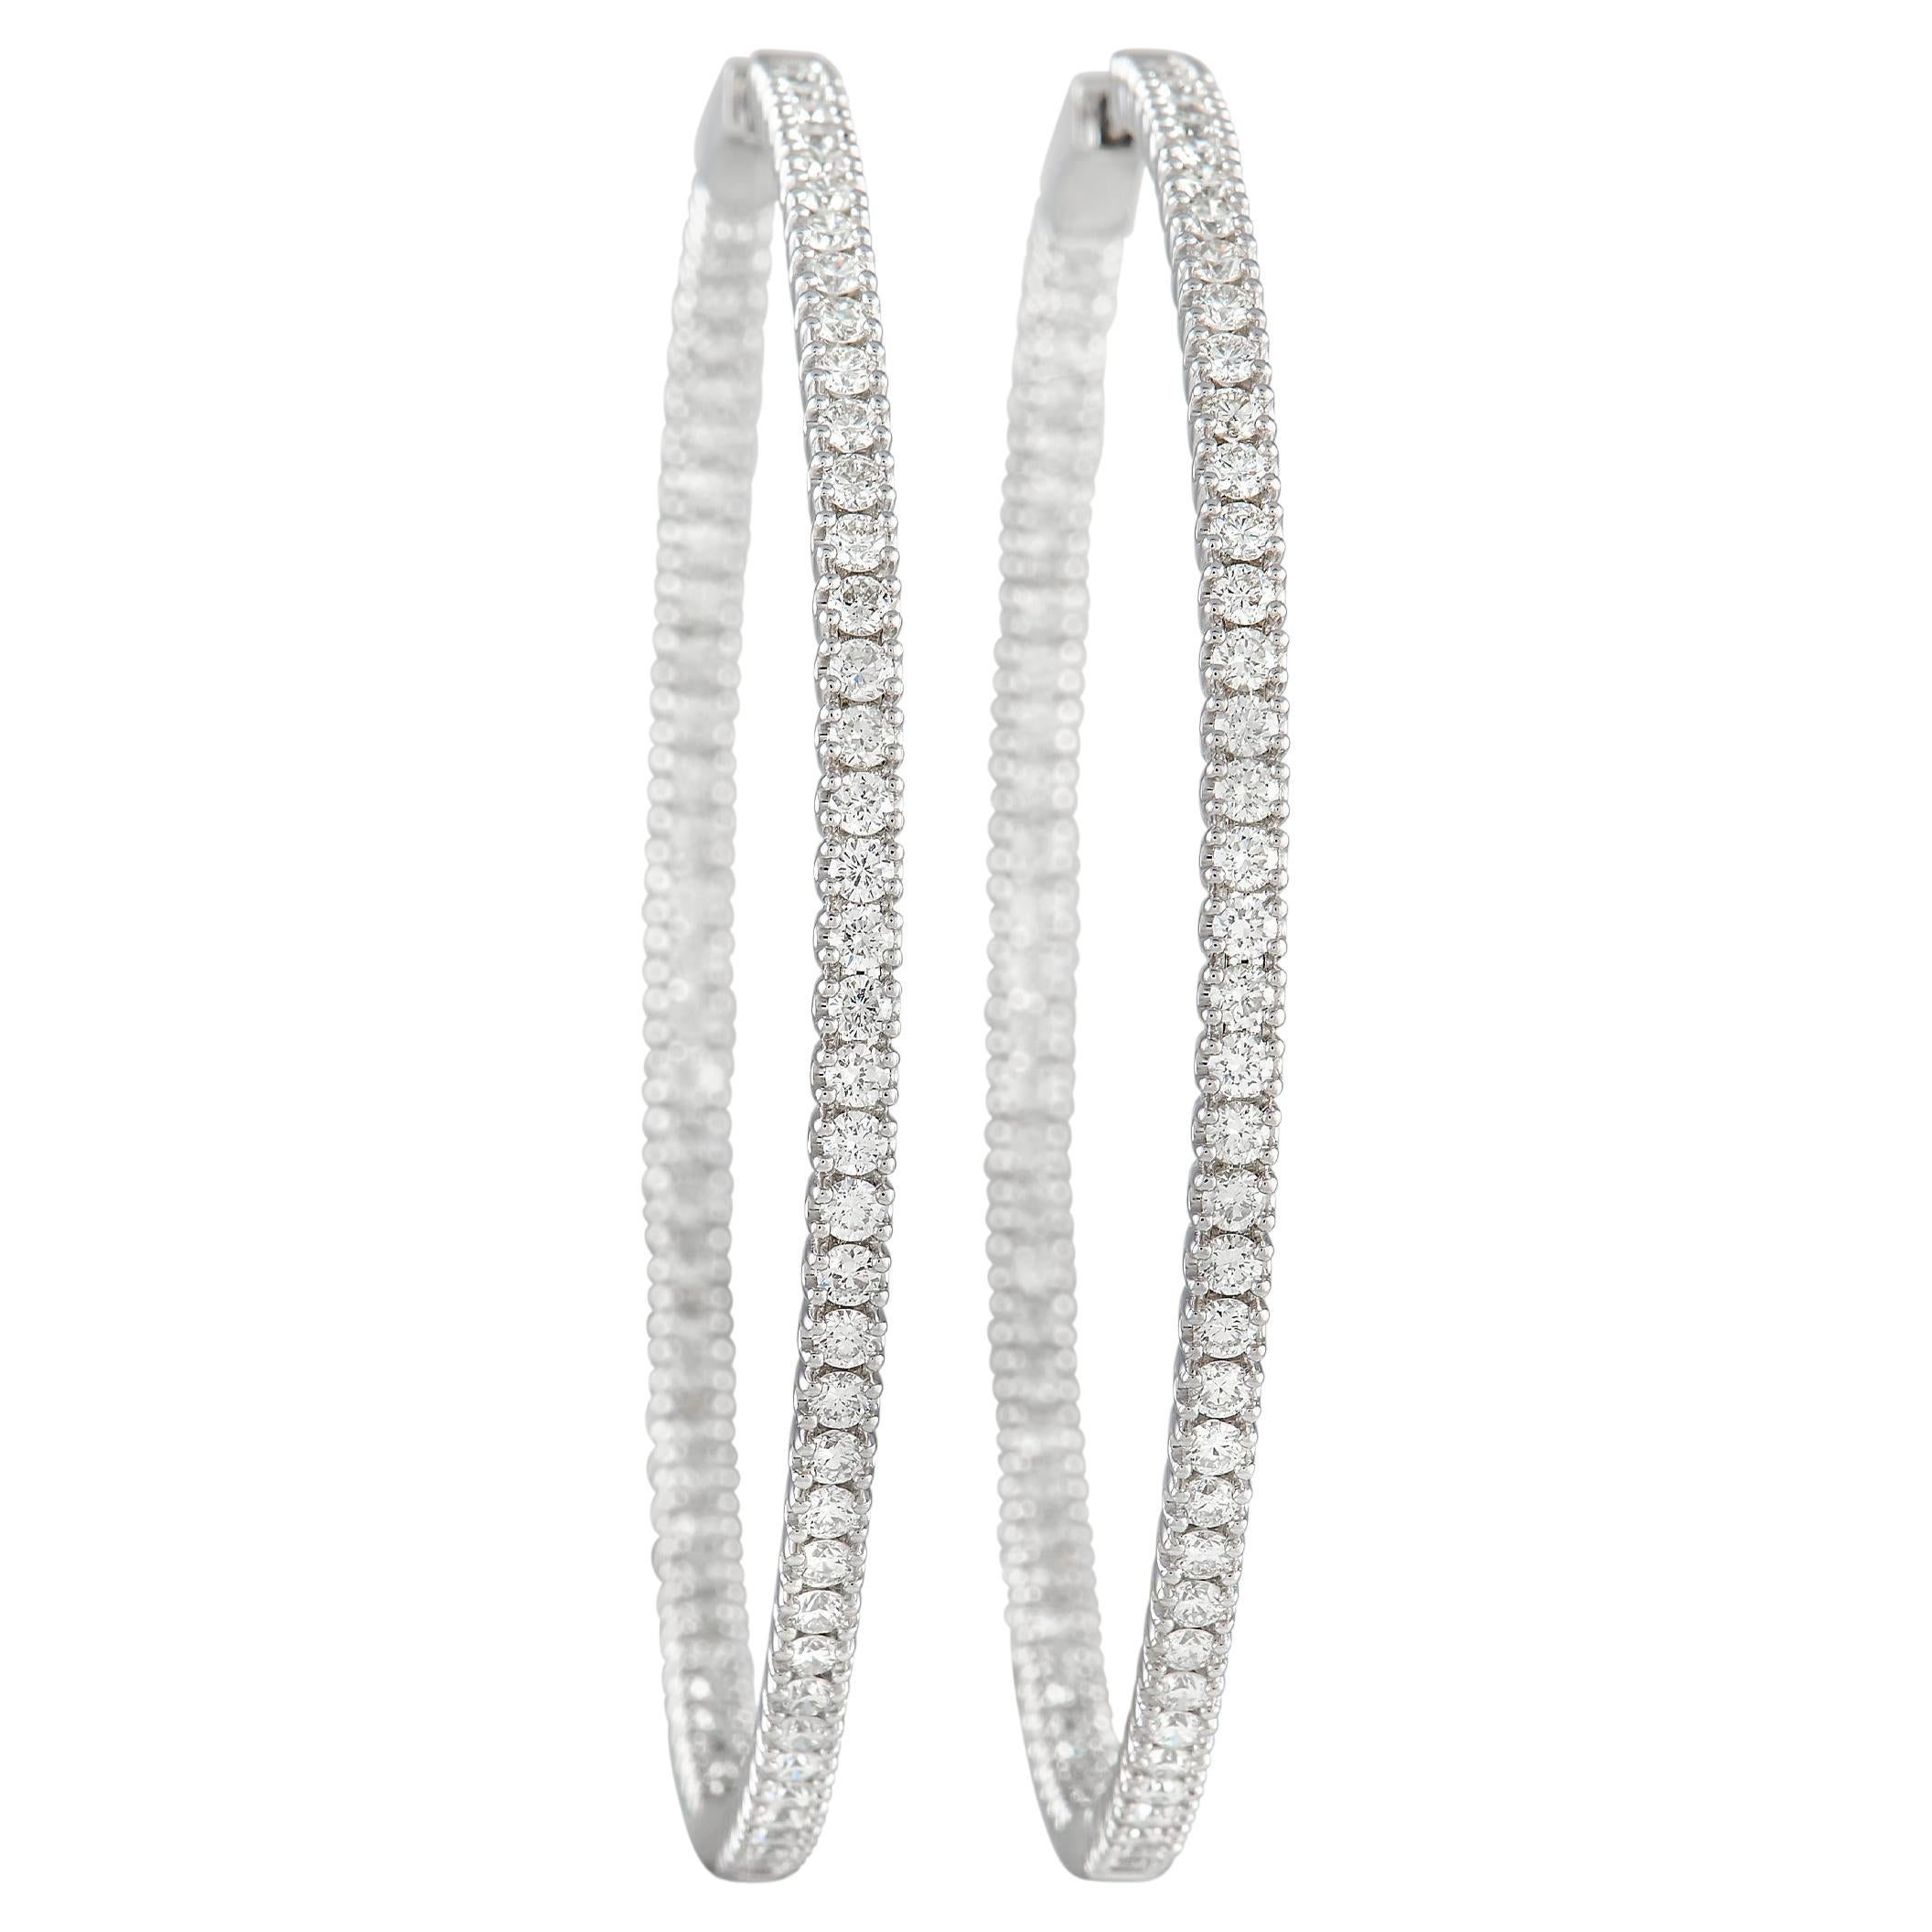 LB Exclusive 14K White Gold 3.74ct Diamond Inside-Out Hoop Earrings